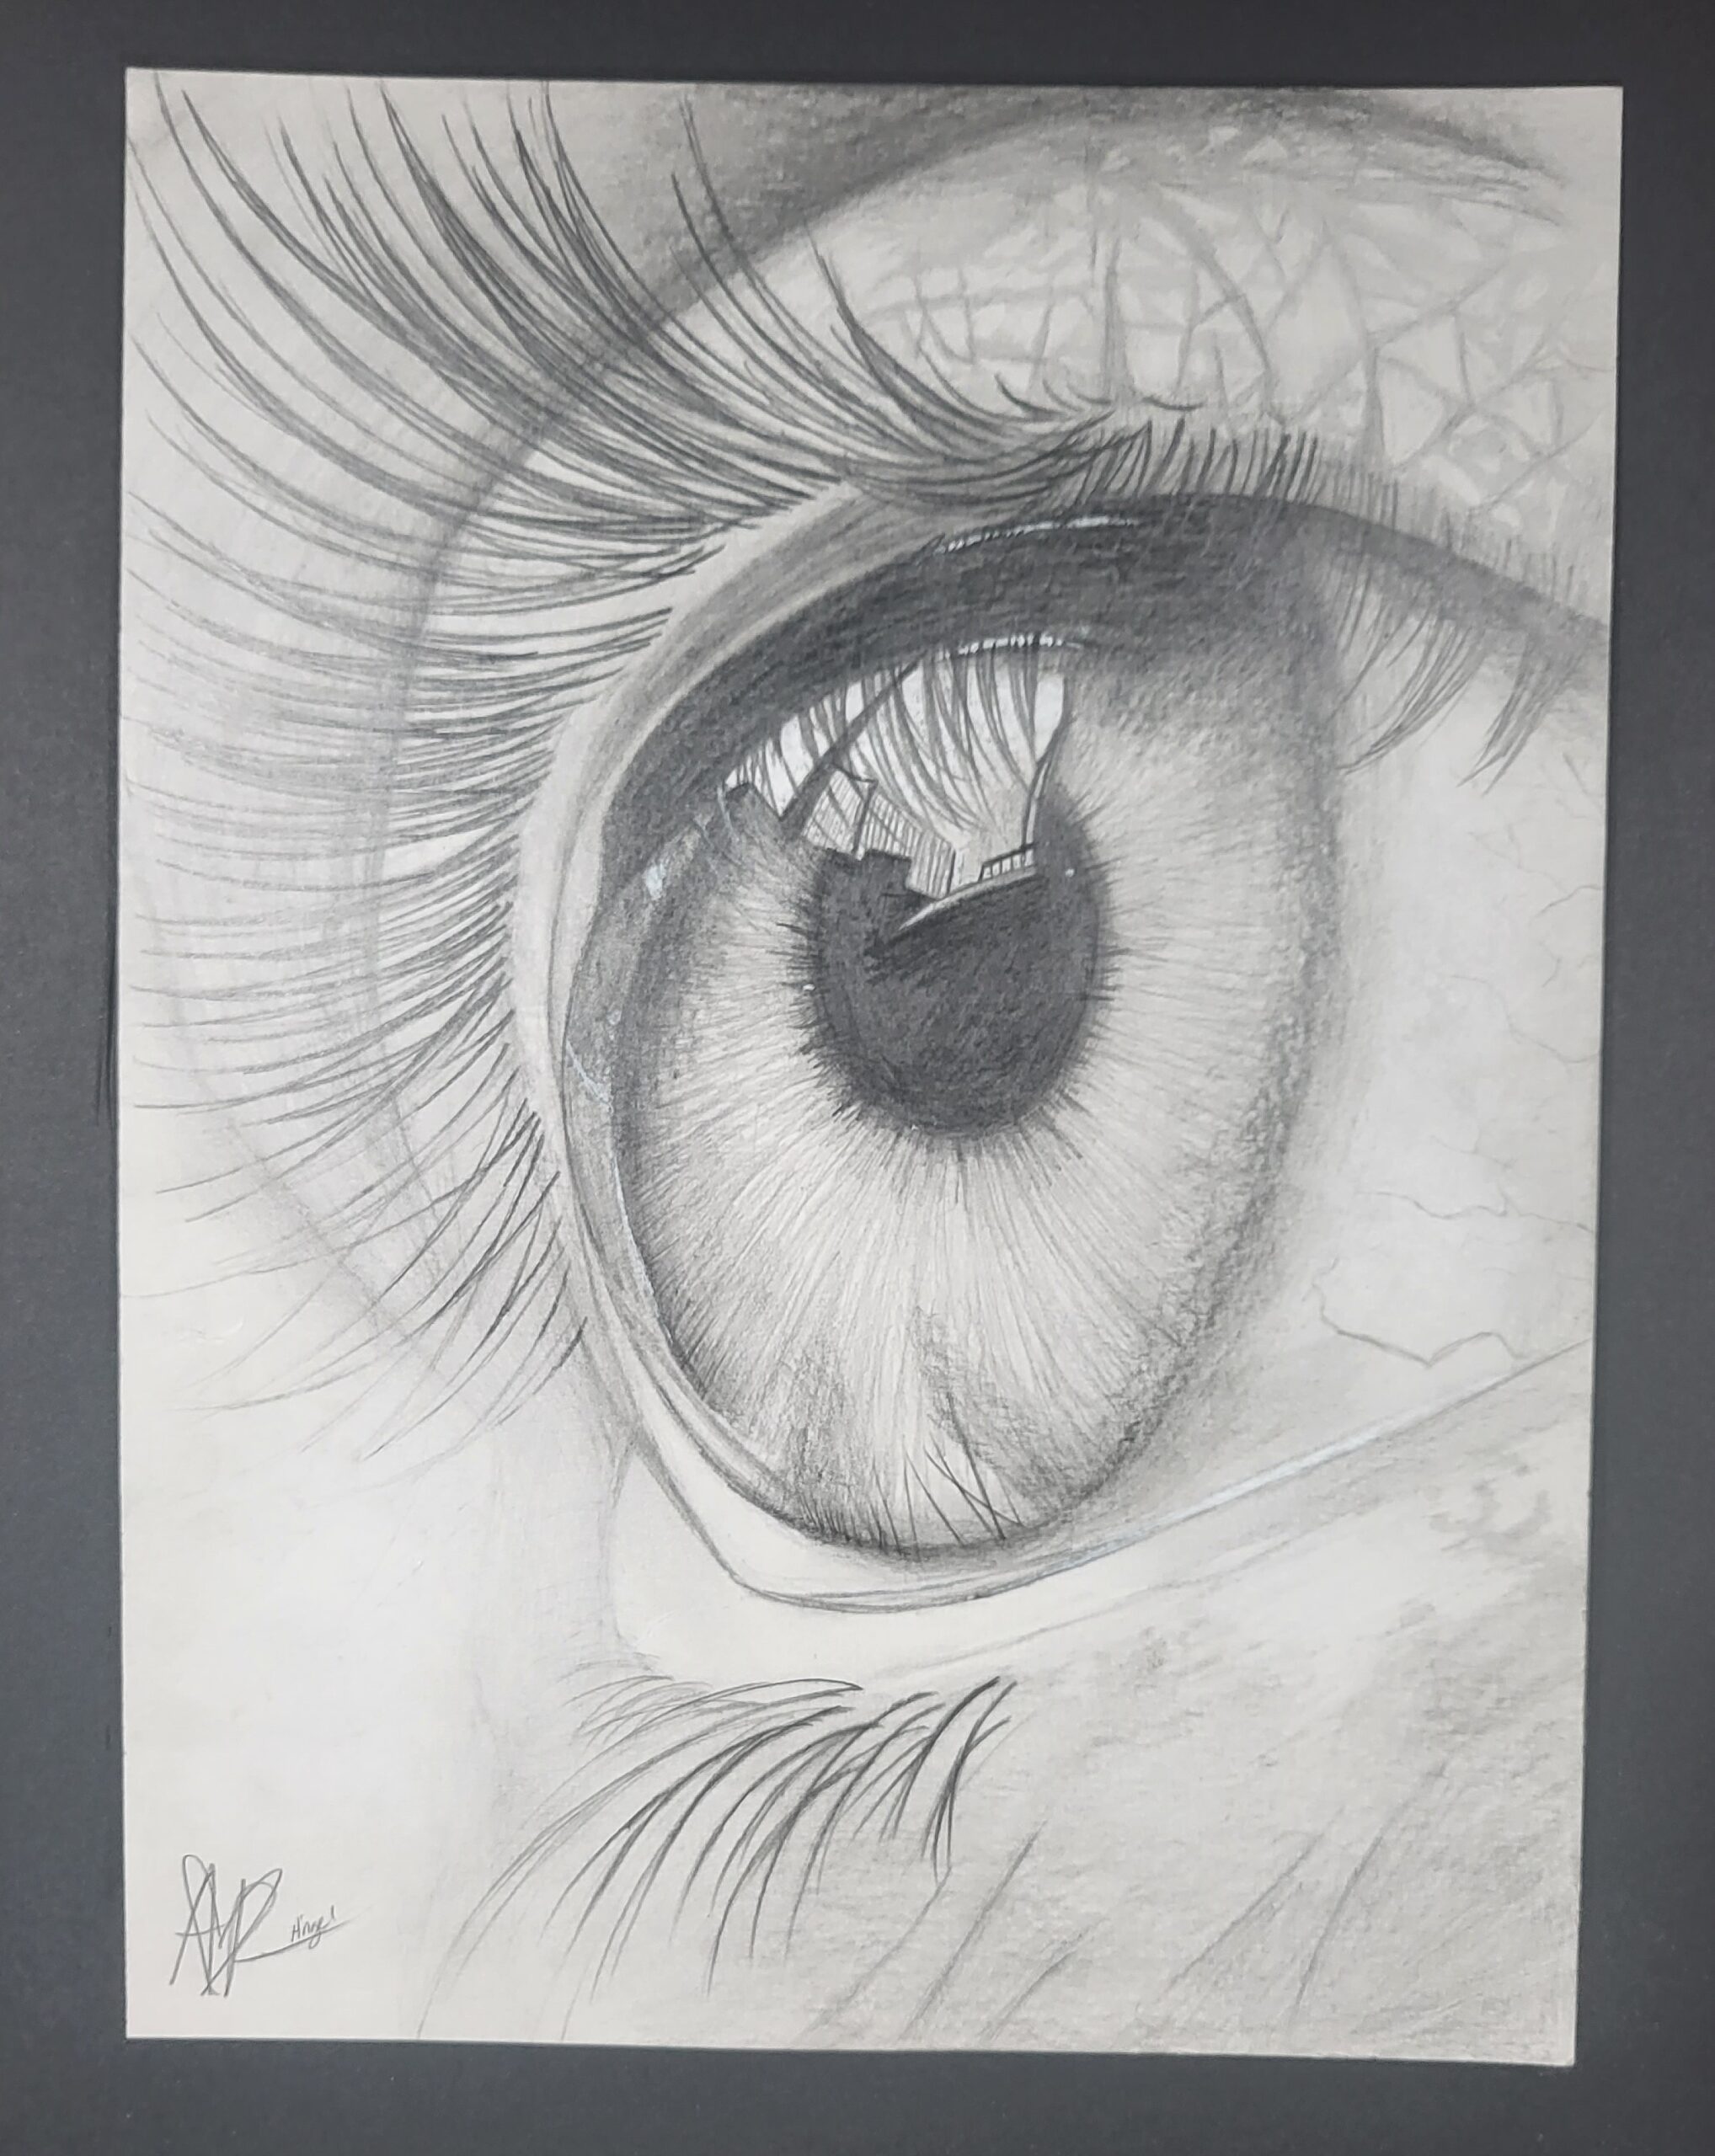 Close-up black and white pencil drawing of a light-colored human eye rendered realistically.